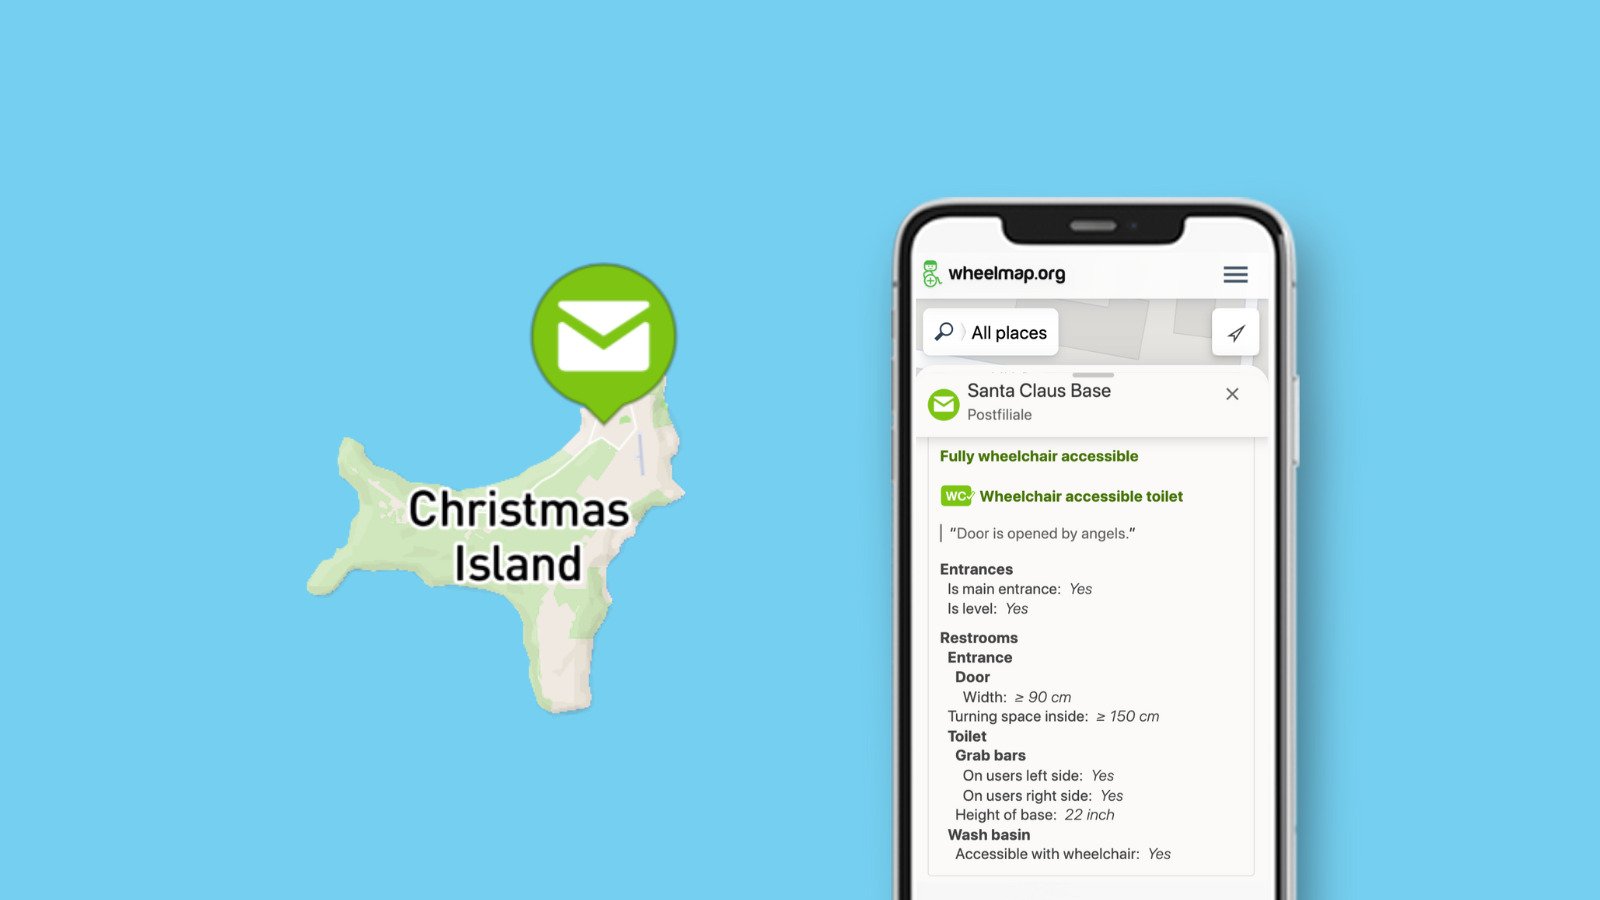 You can see a map view of Australia's Christmas Island on Wheelmap.org, a green pin with letter symbol sits at the top. Next to it is a smartphone screen with the location details. The location is called "Santa Claus Base." Below that, wheelchair accessibility details are listed.